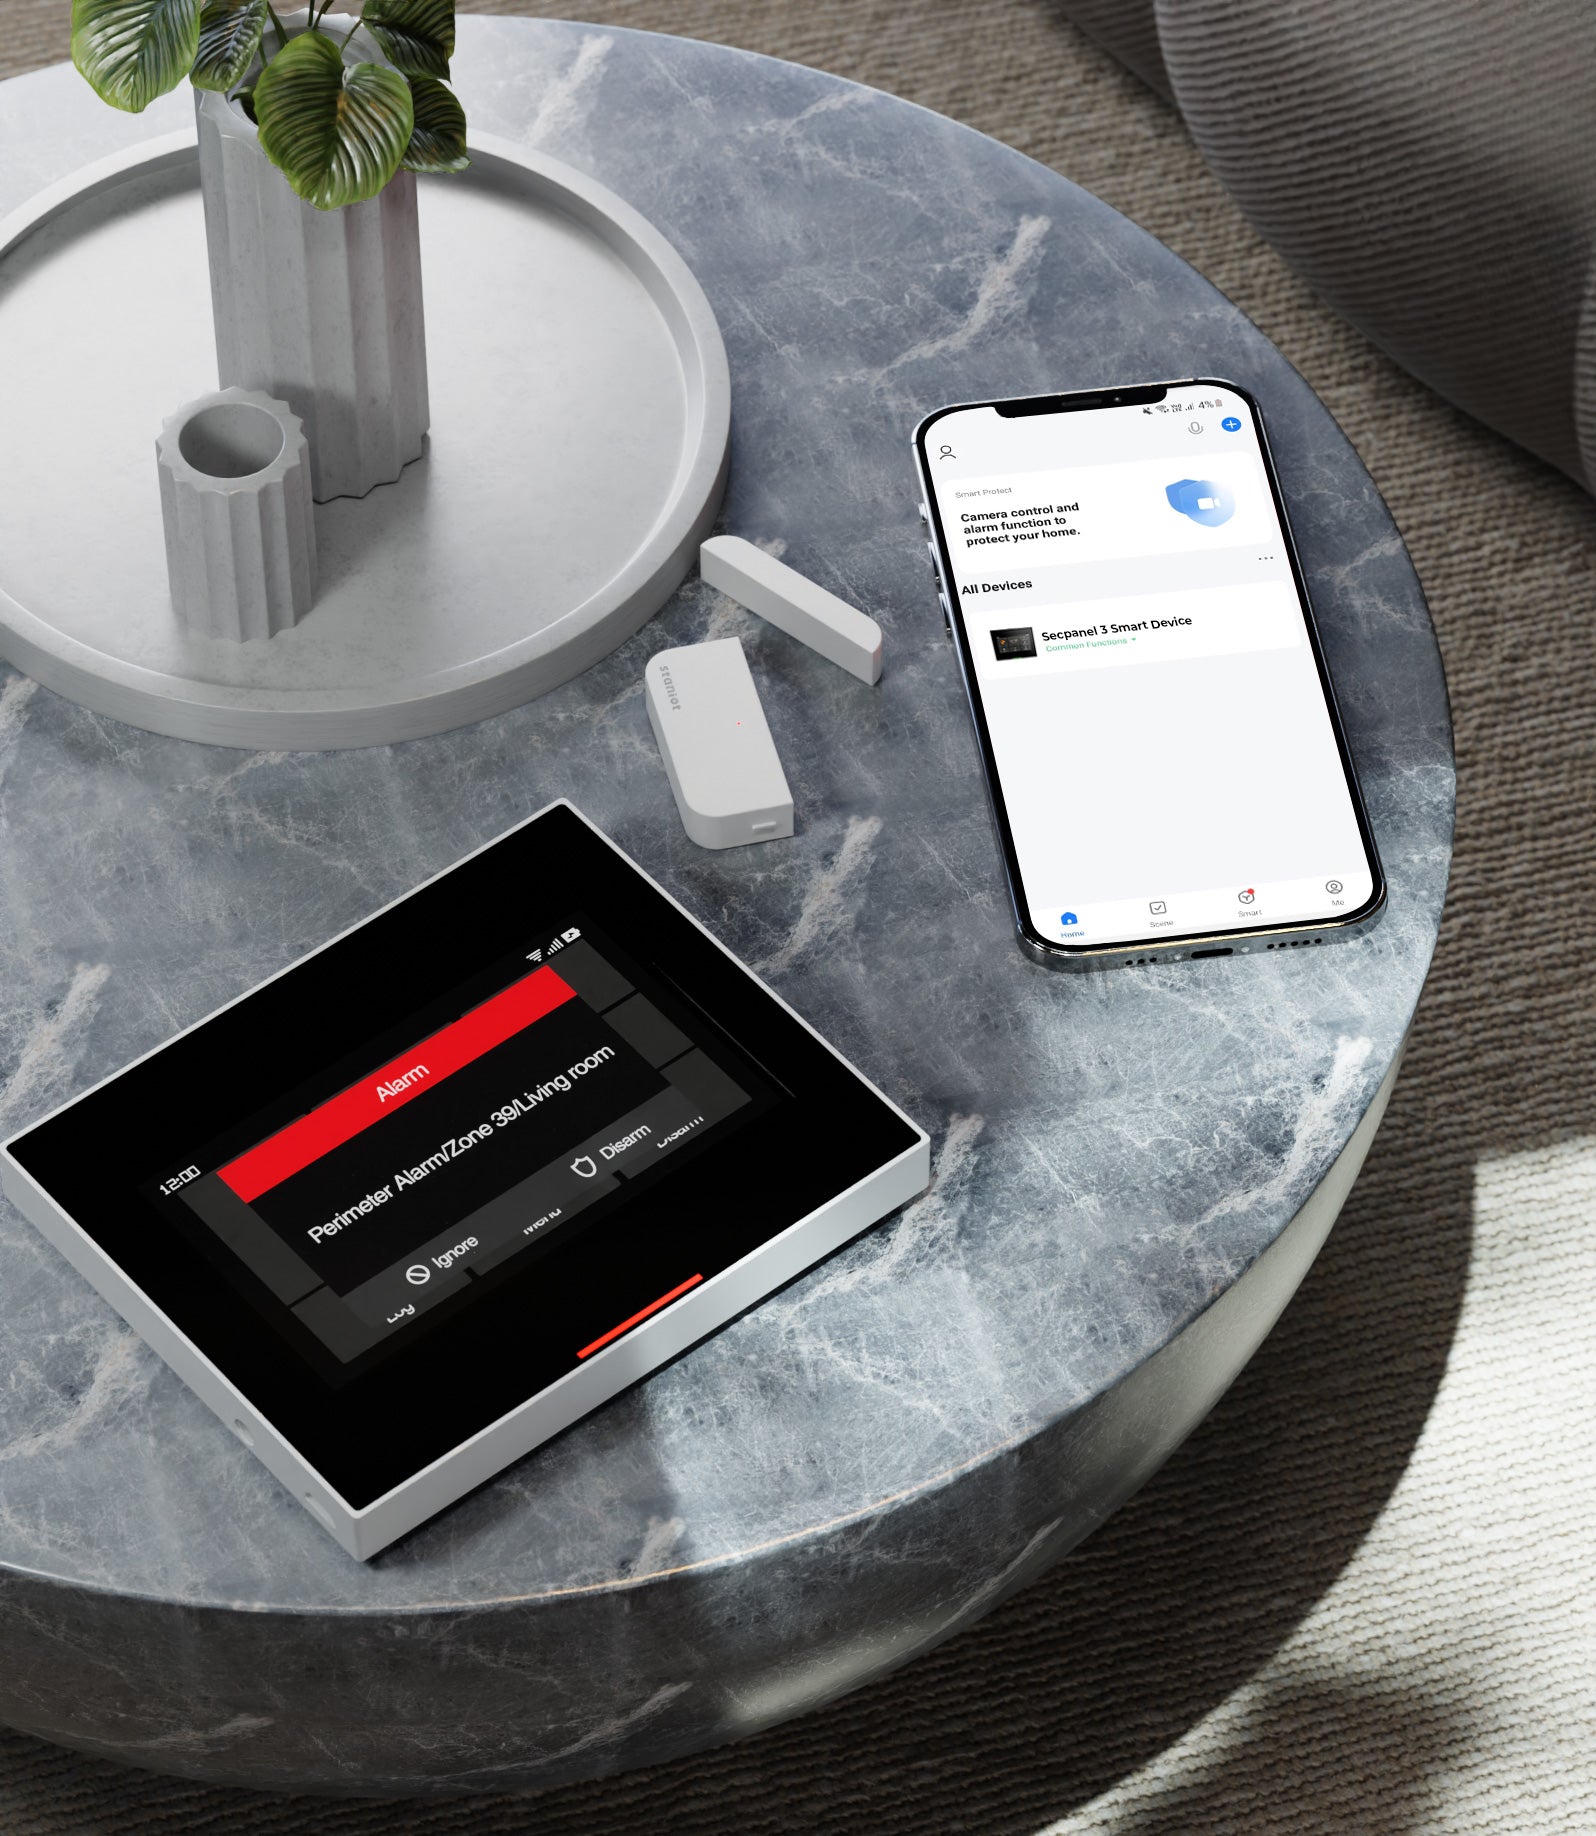 Staniot SecPanel 3 security system wireless display connected to mobile device Tuya Smart Life app on top of dark marble coffee table in home living room